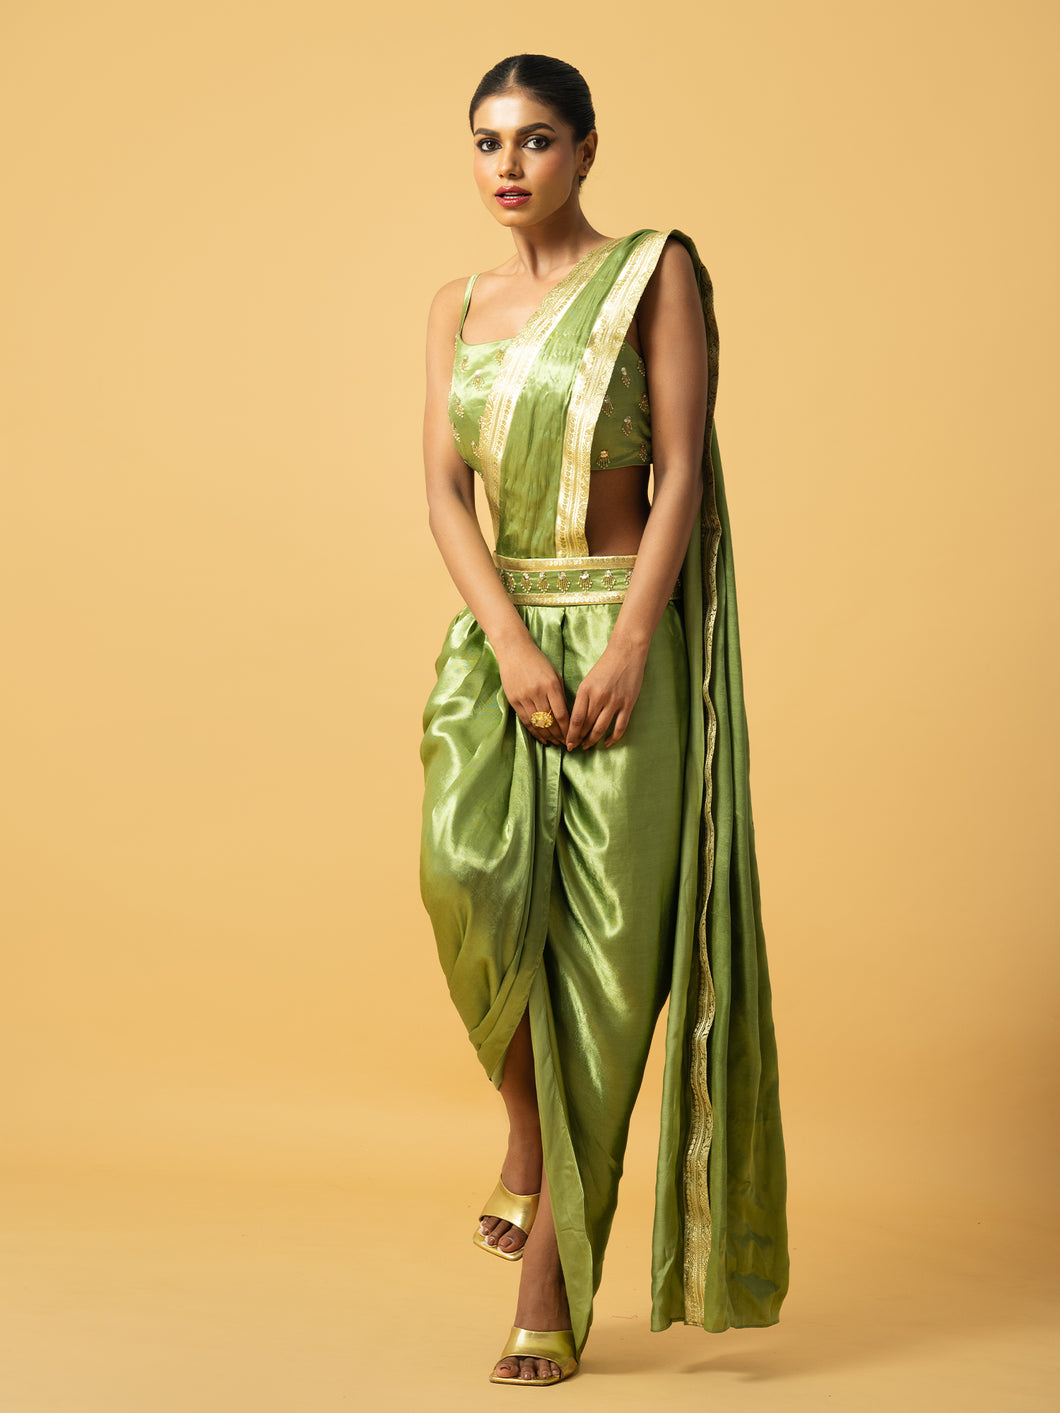 Bright mint green modal satin dhoti saree with hand embroidery on blouse & golden lace on saree pallu